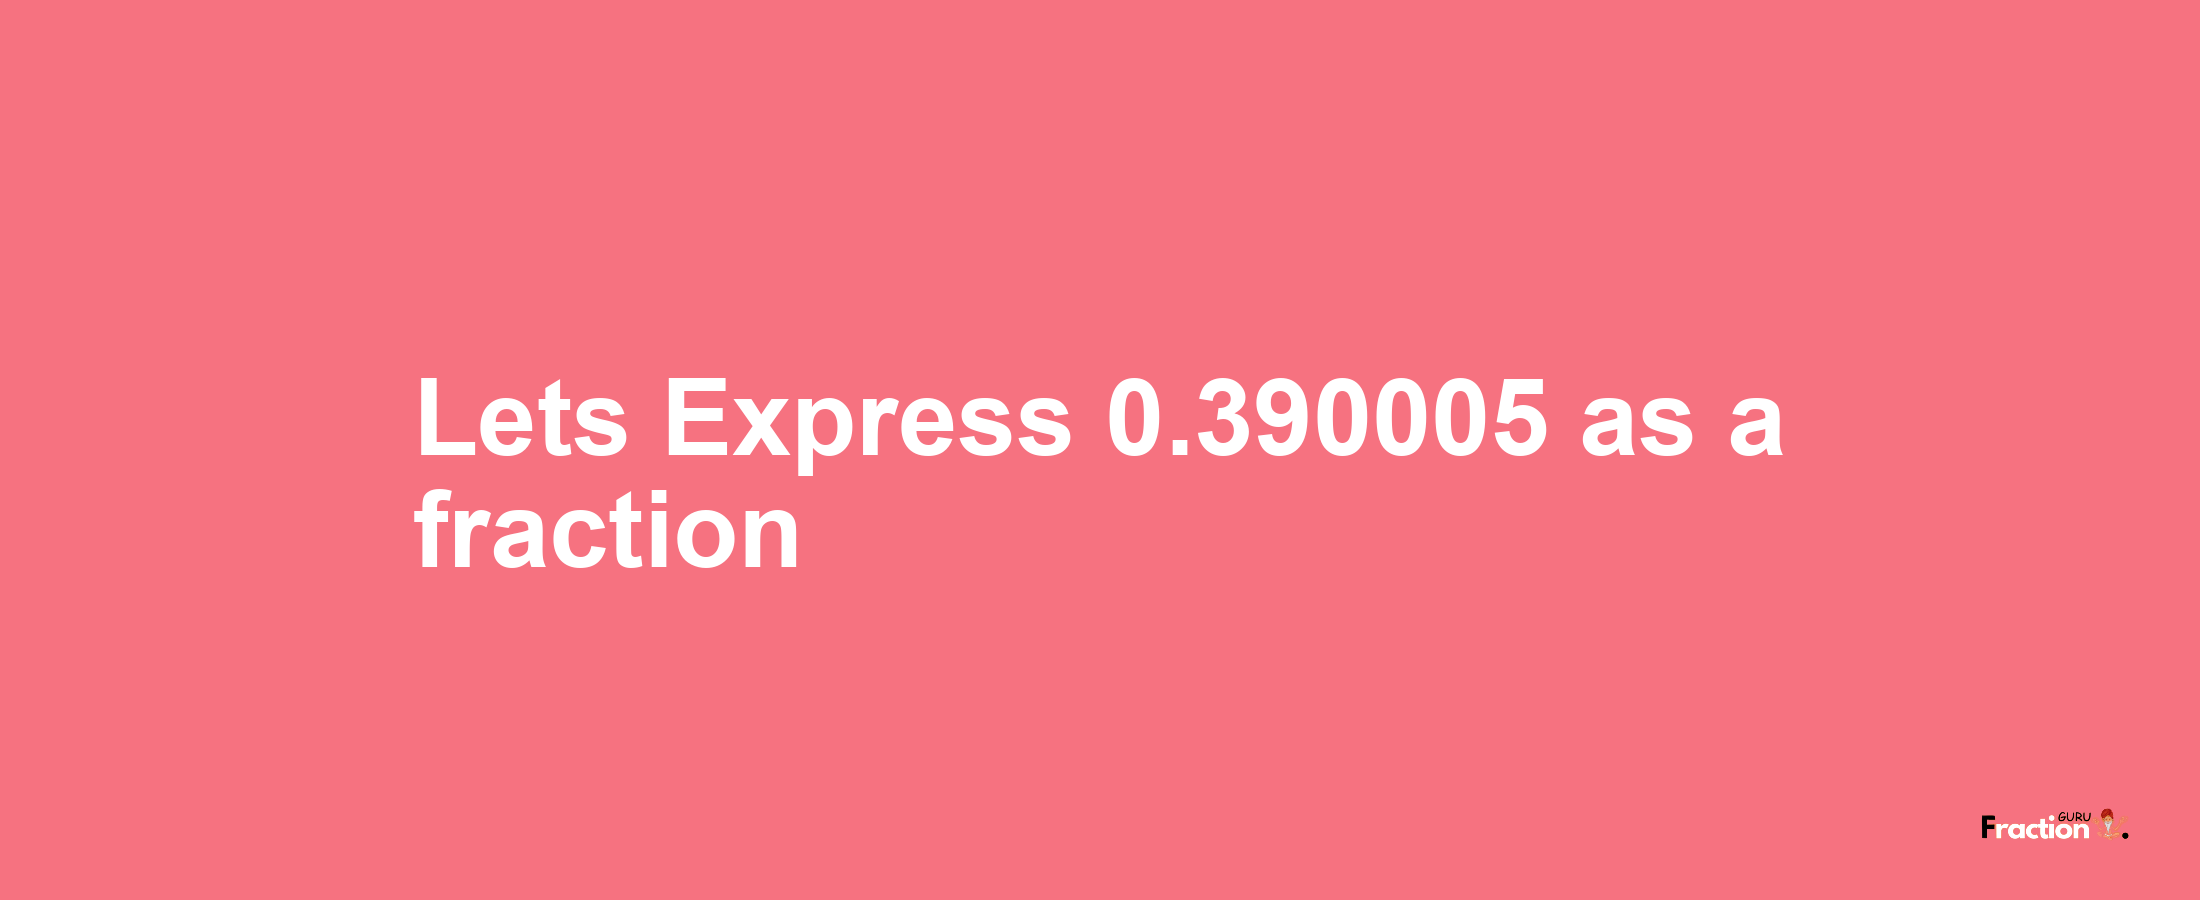 Lets Express 0.390005 as afraction